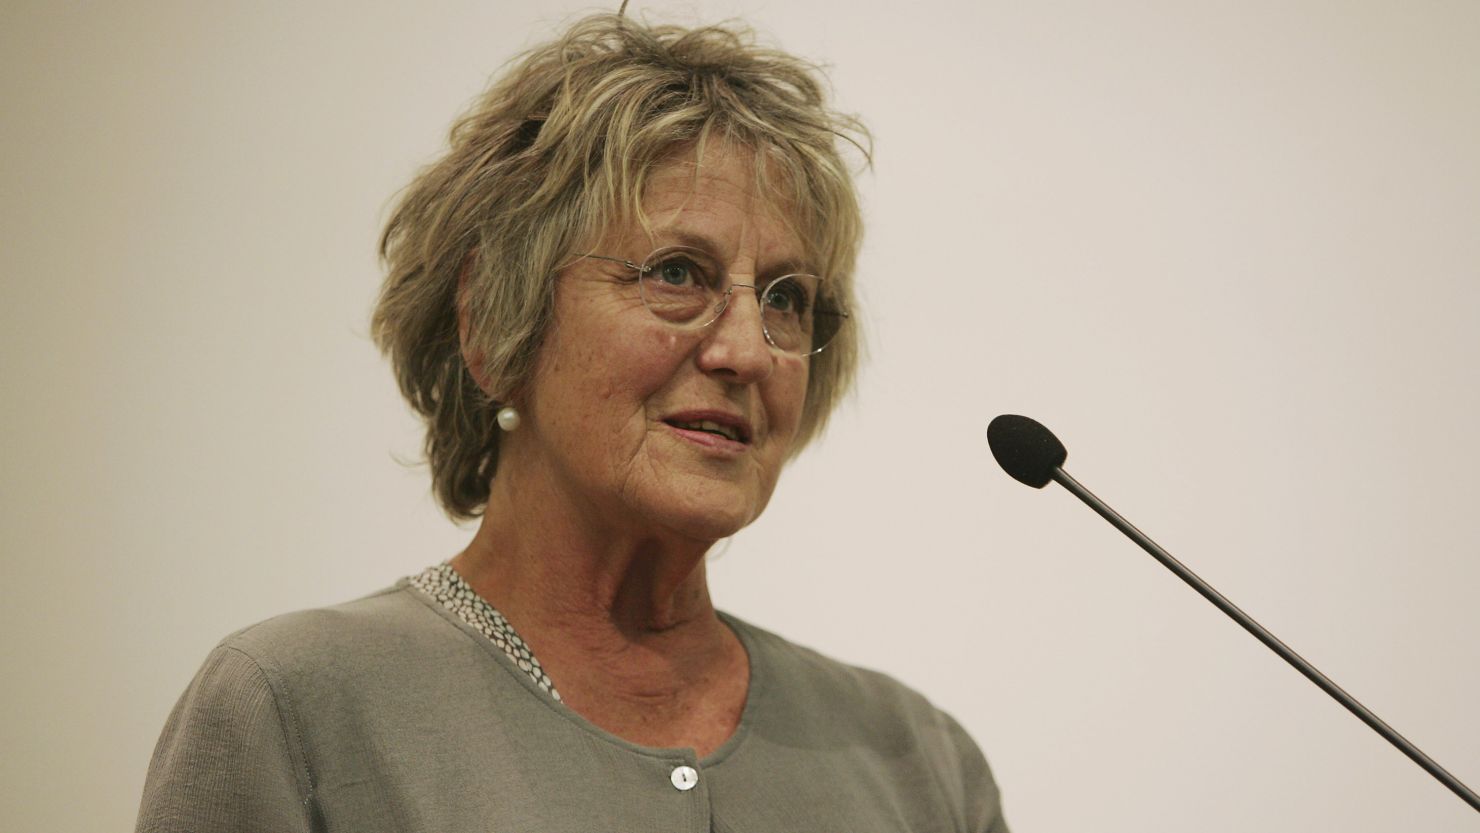 Germaine Greer has a long history of making controversial remarks that have garnered her publicity.